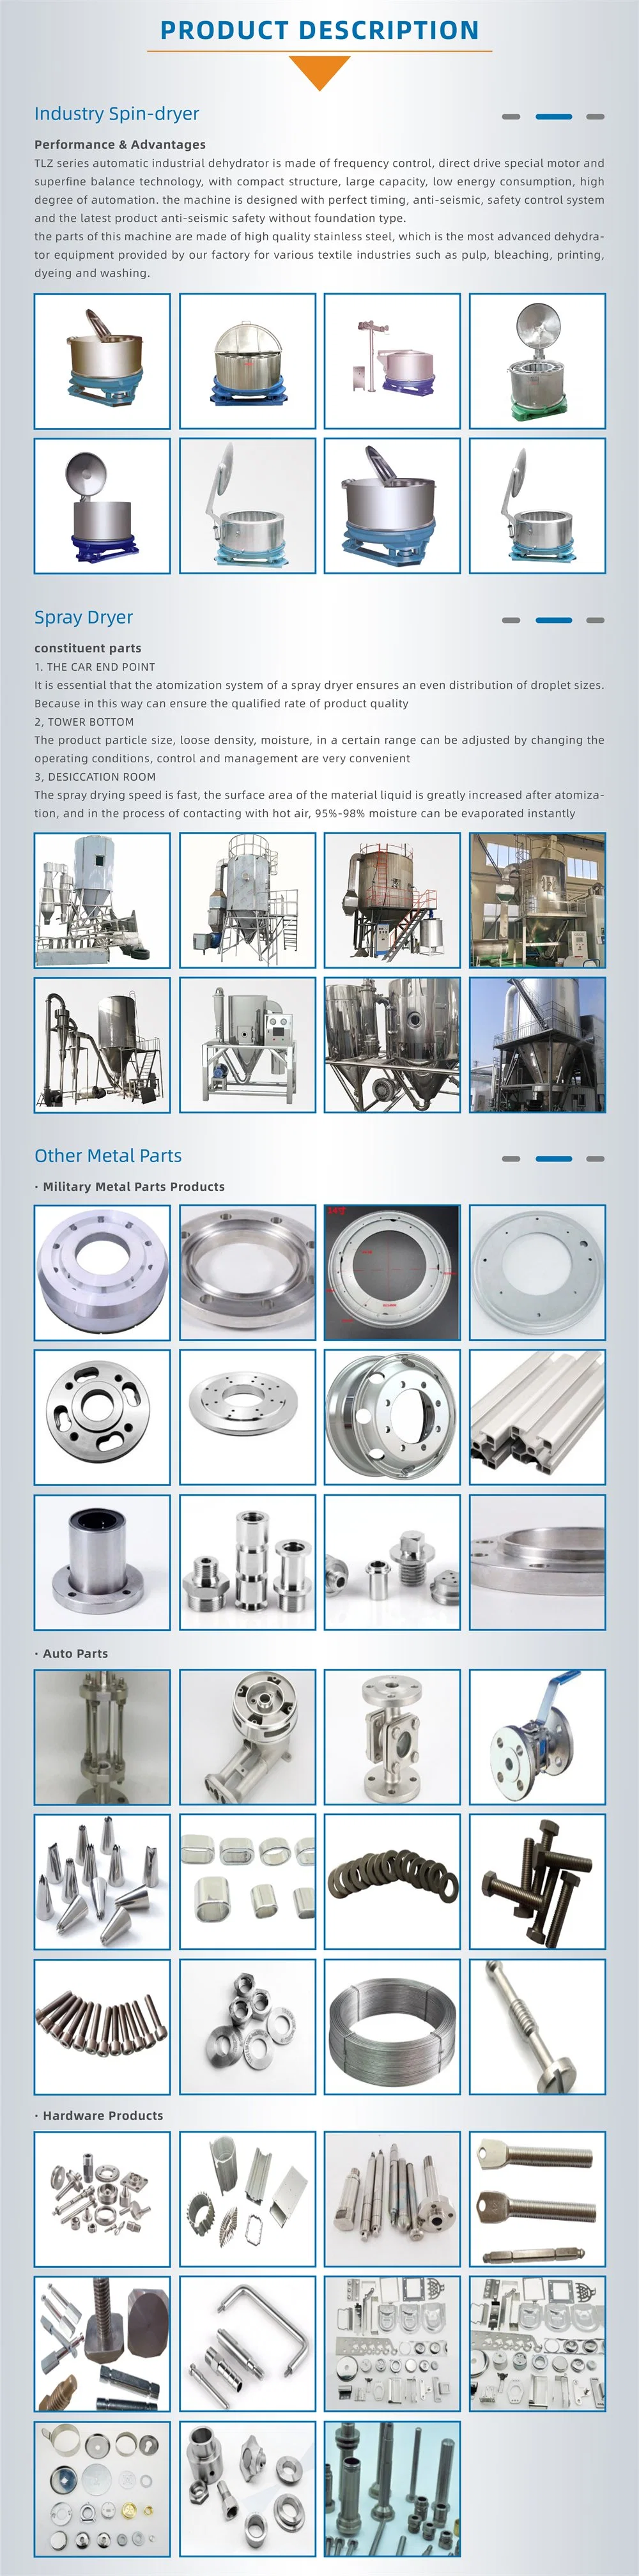 Commercial Electric Industry Spin-Dryer Hydro Extractor Machine Industrial Centrifugal Dehydrator